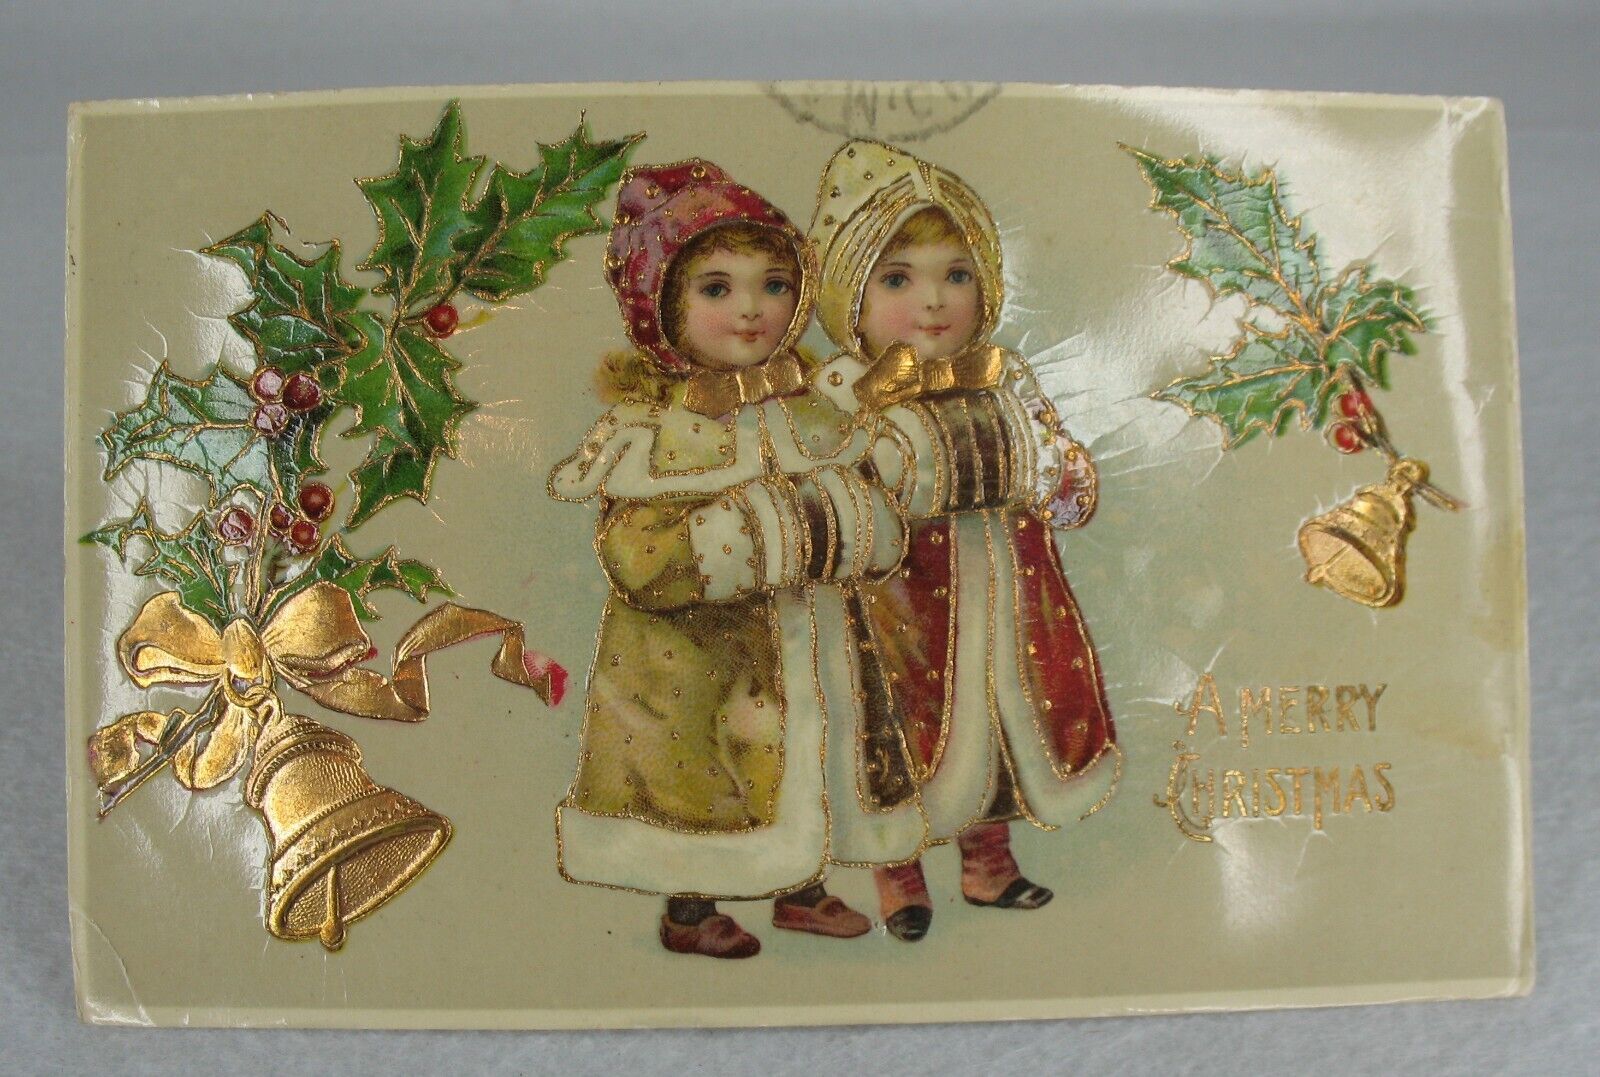 Edwardian Postcard 1 cent 1908 posted Christmas Girls Embossed Laminated Germany